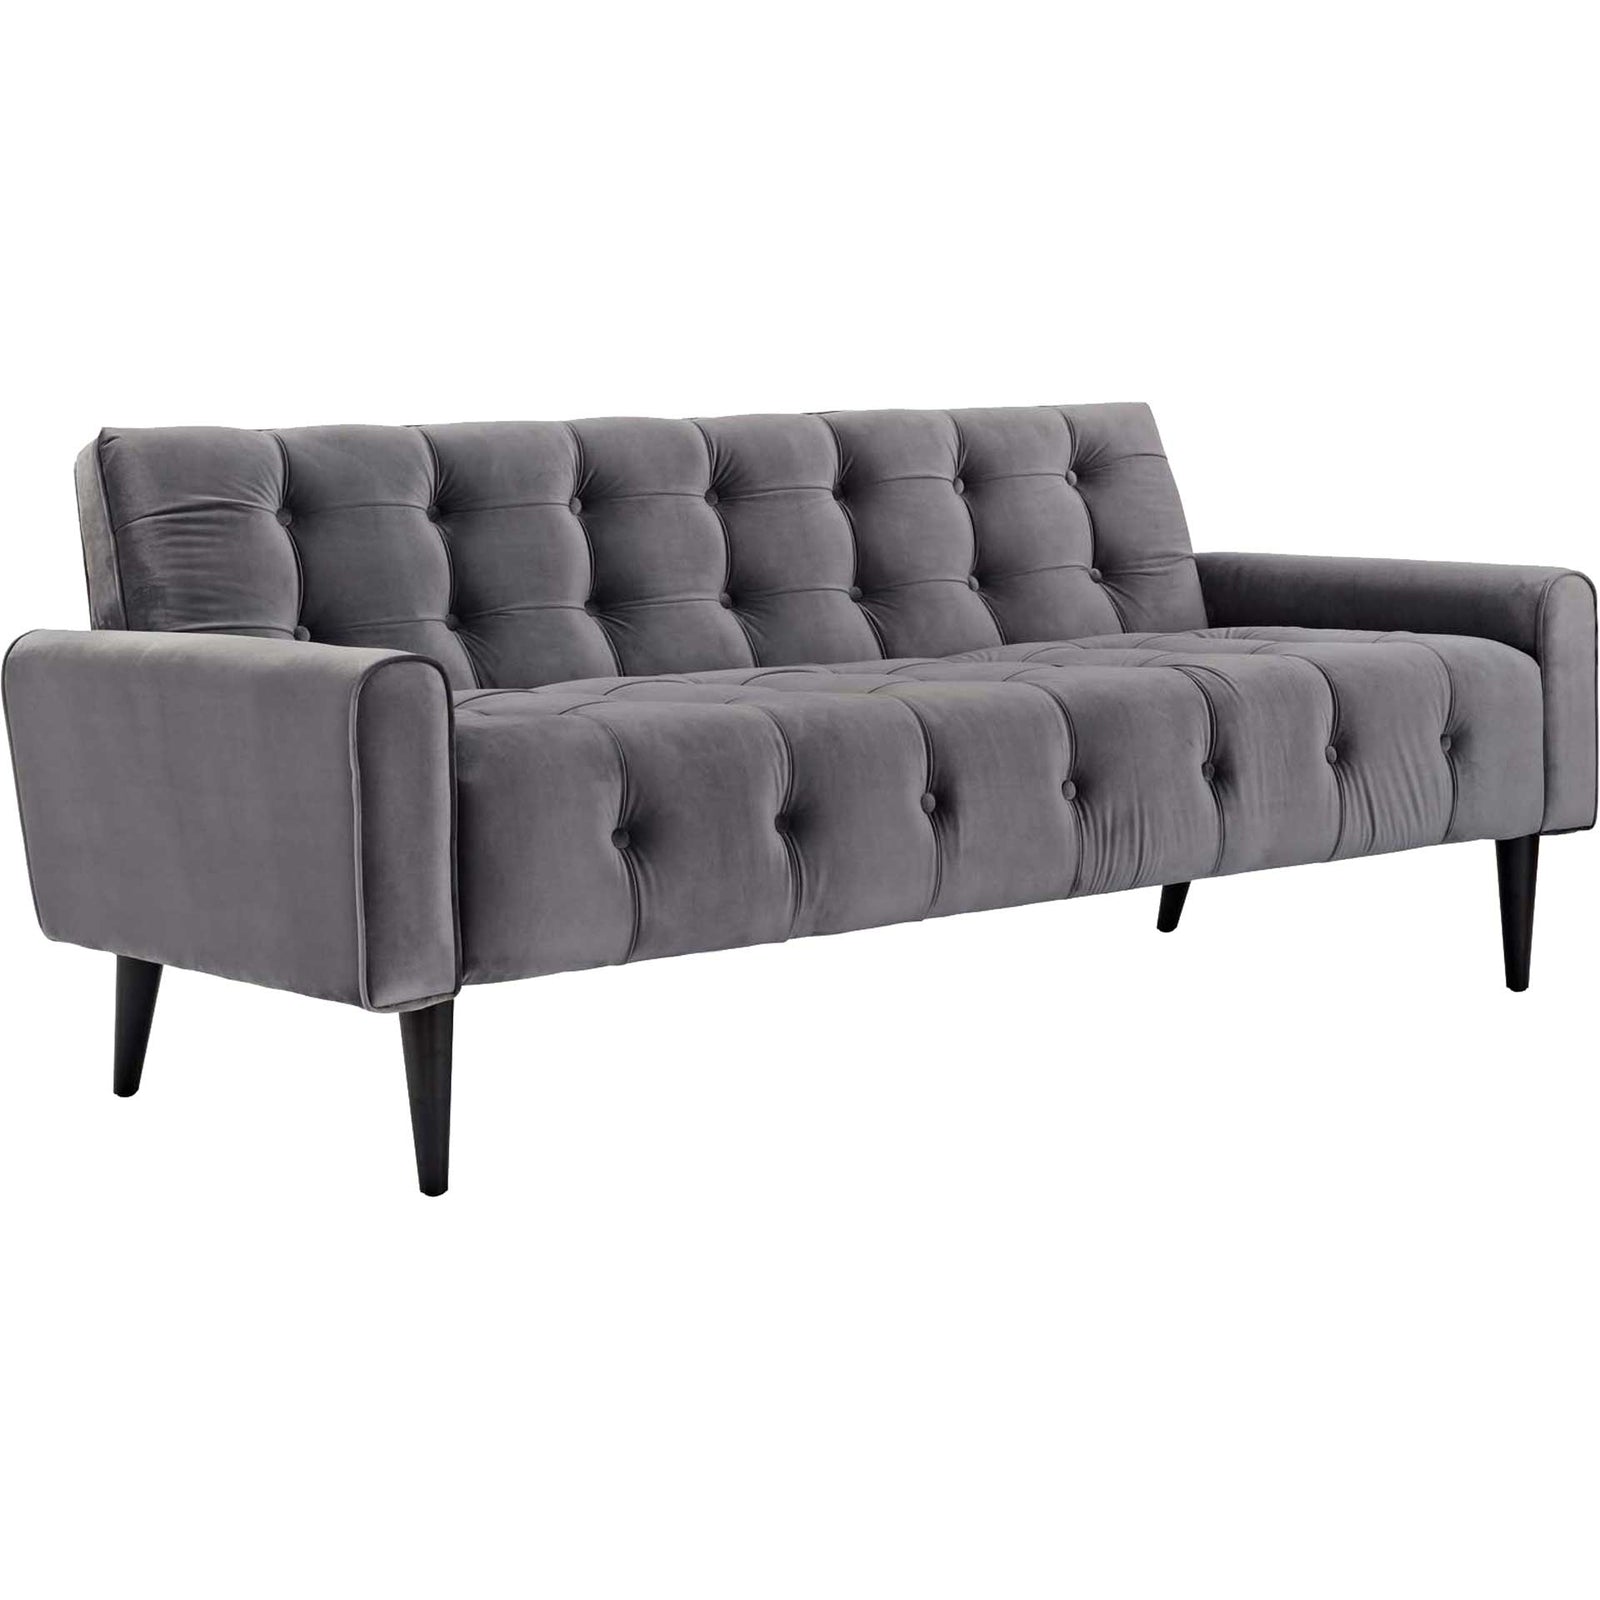 Sofas Page 2 - Froy.com